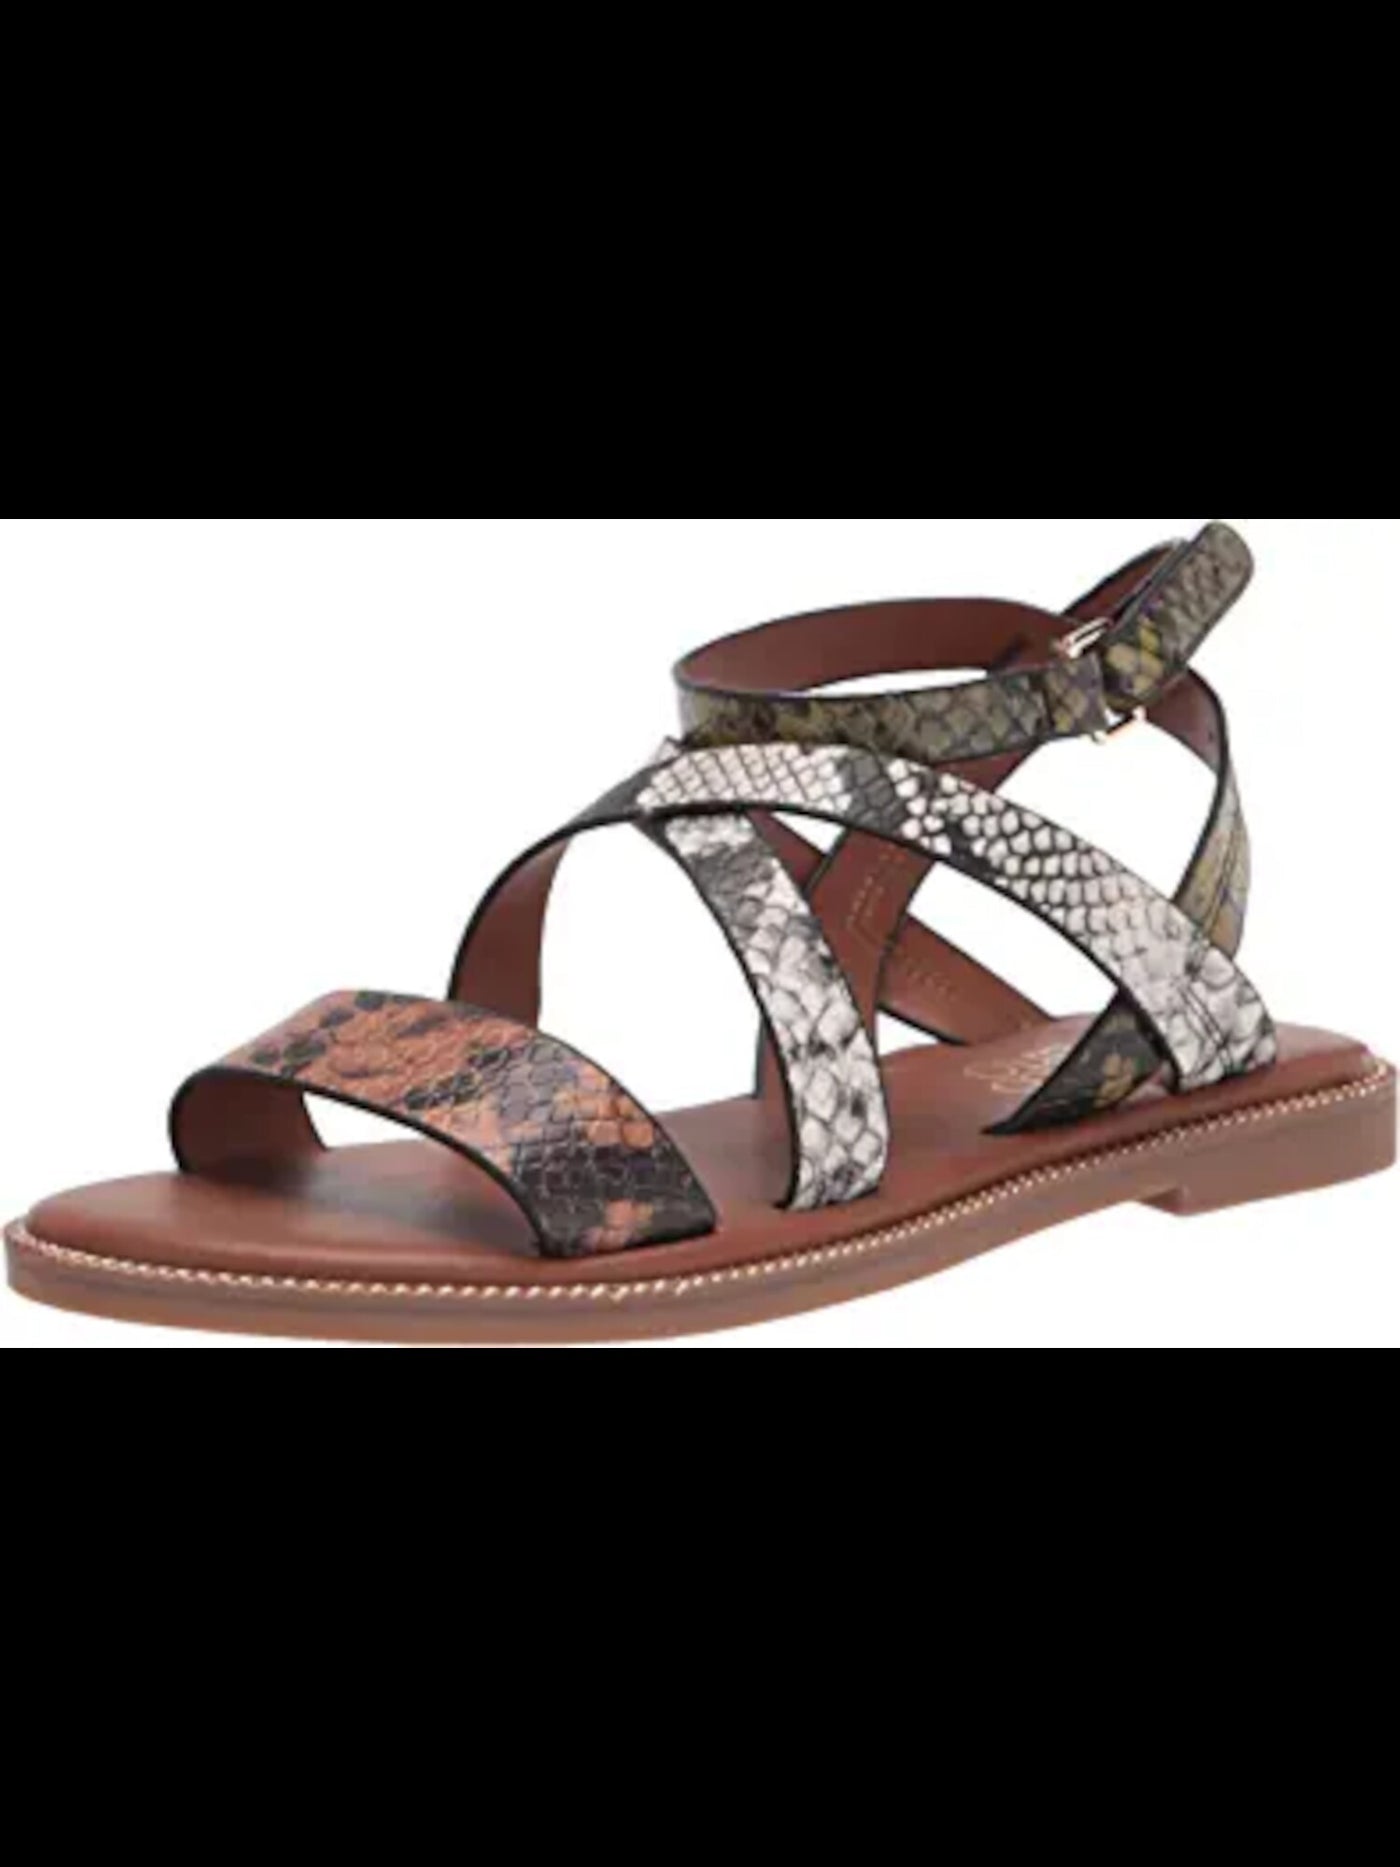 FRANCO SARTO Womens Brown Snake Cushioned Strappy Kemmer Round Toe Buckle Sandals Shoes 8.5 M